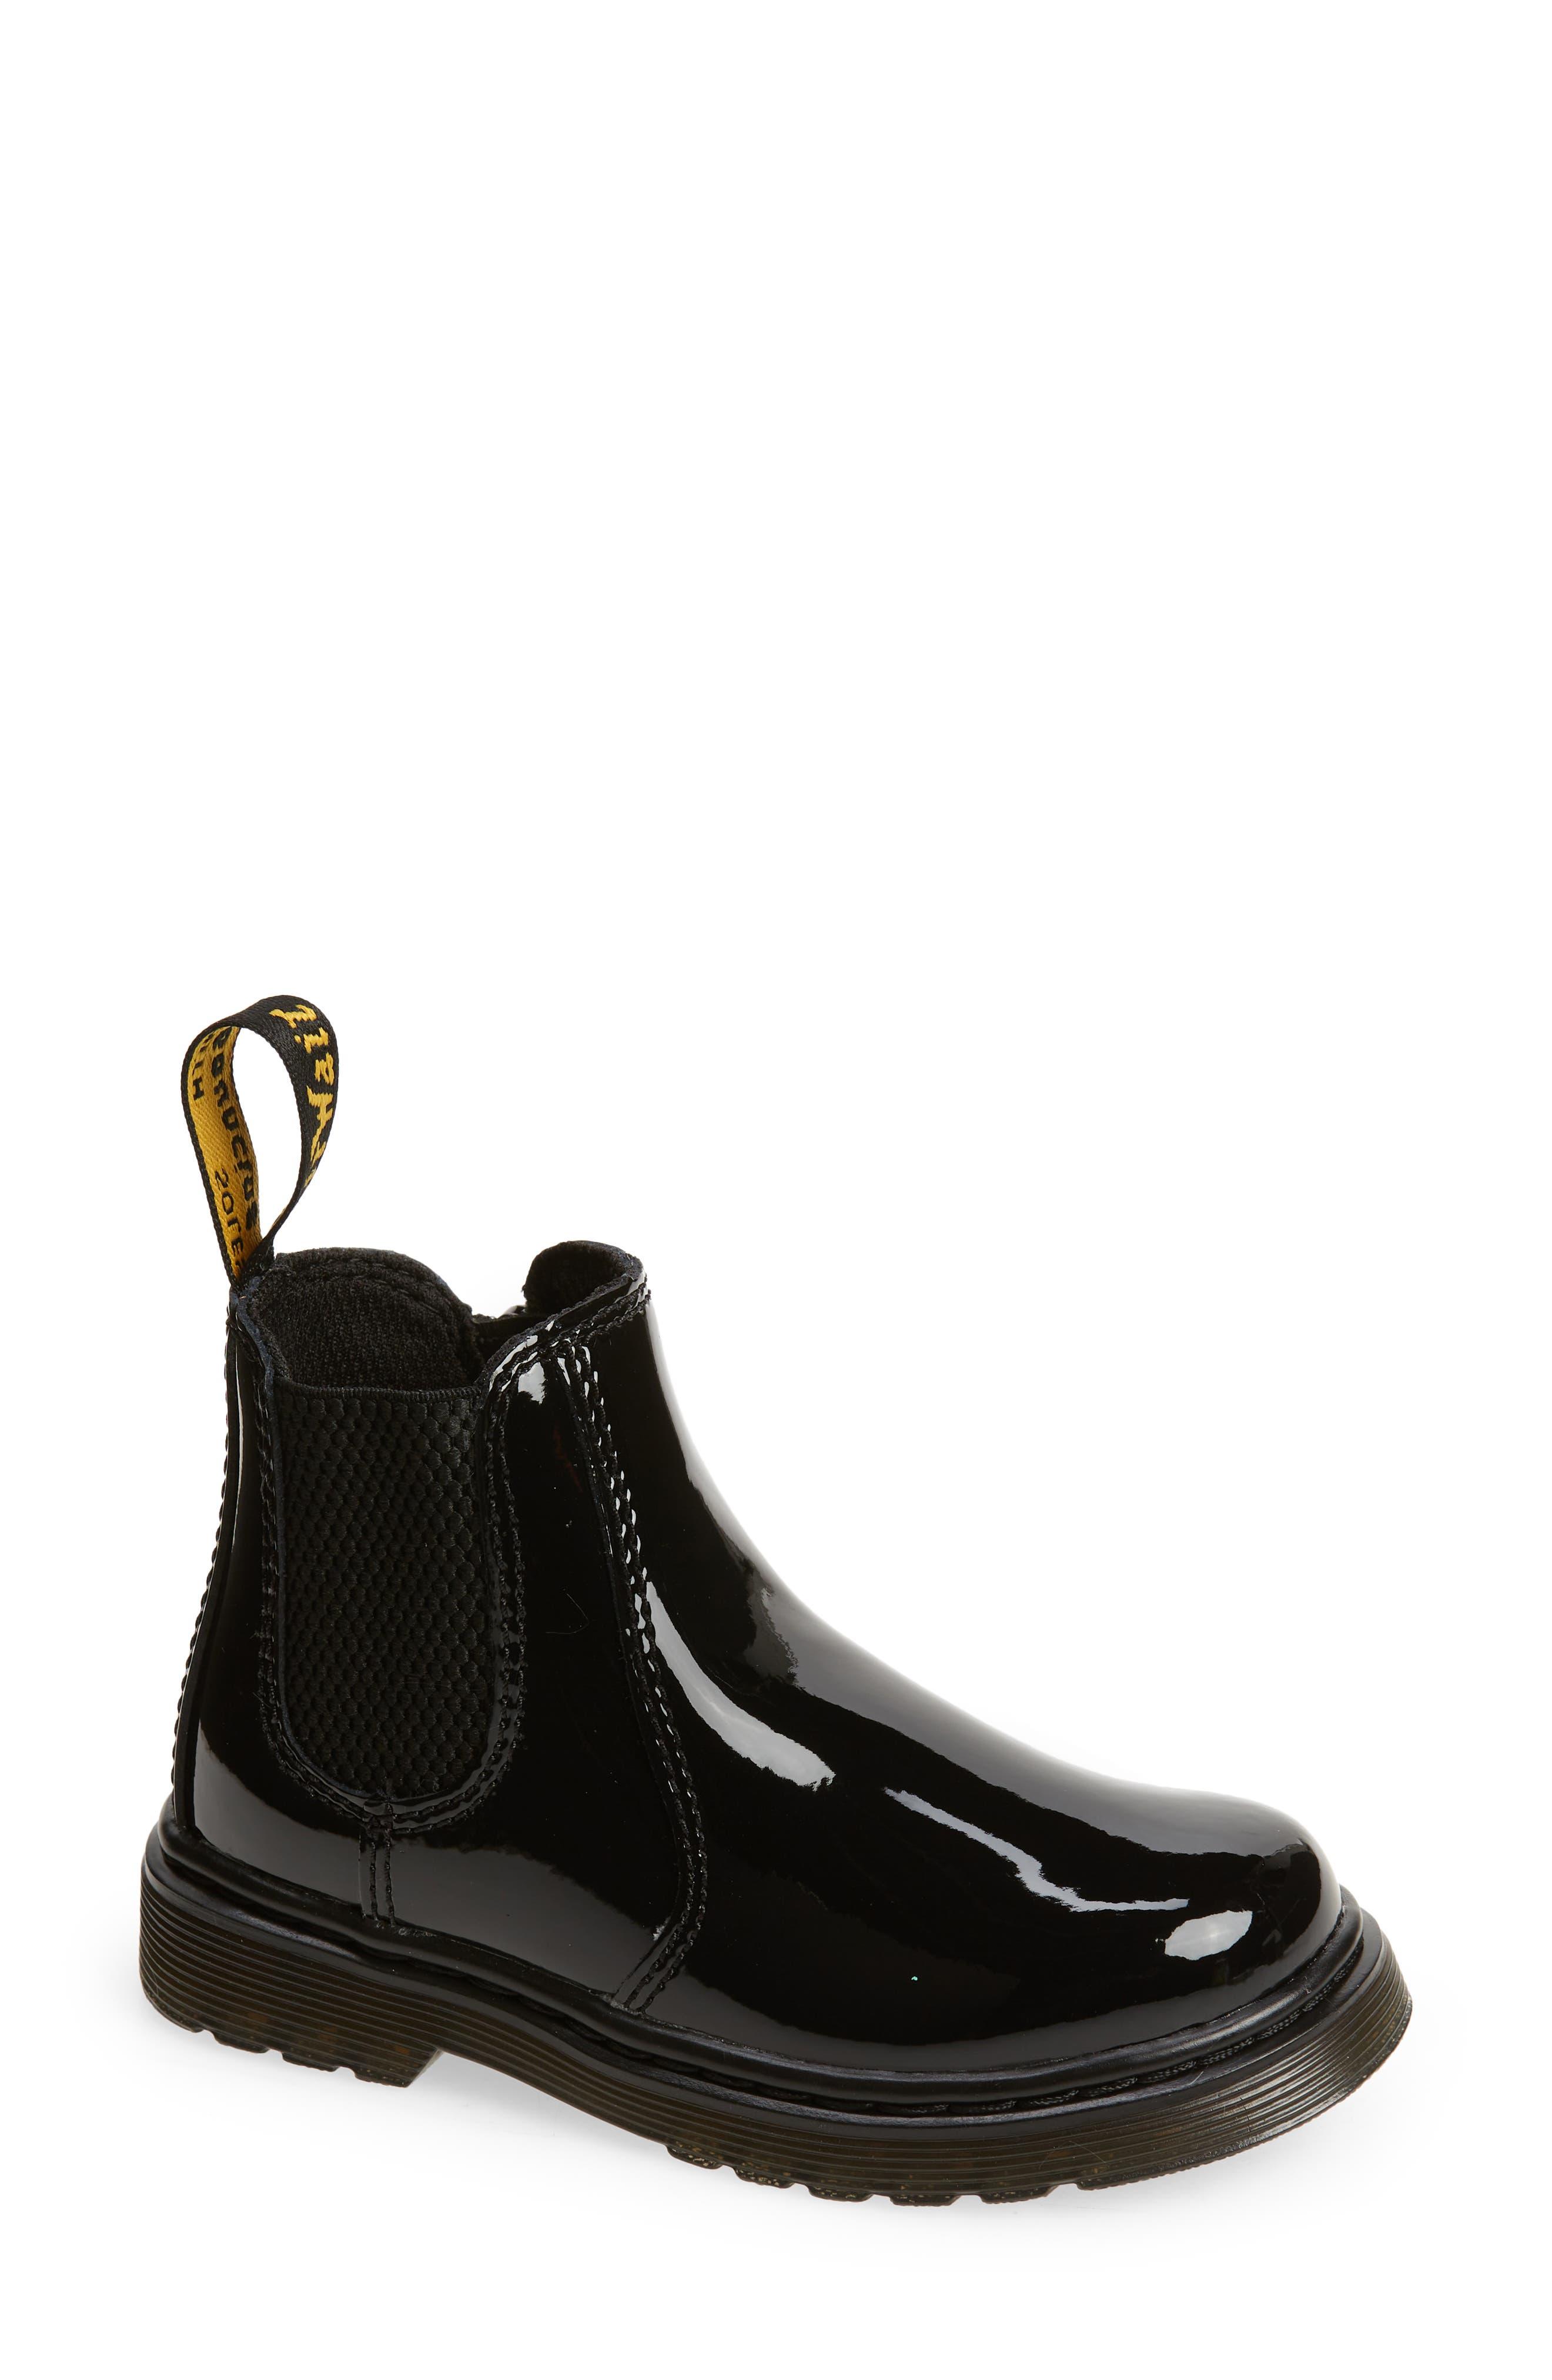 Dr. Martens 2976 Patent Leather Cheslea Boot in Black | Lyst